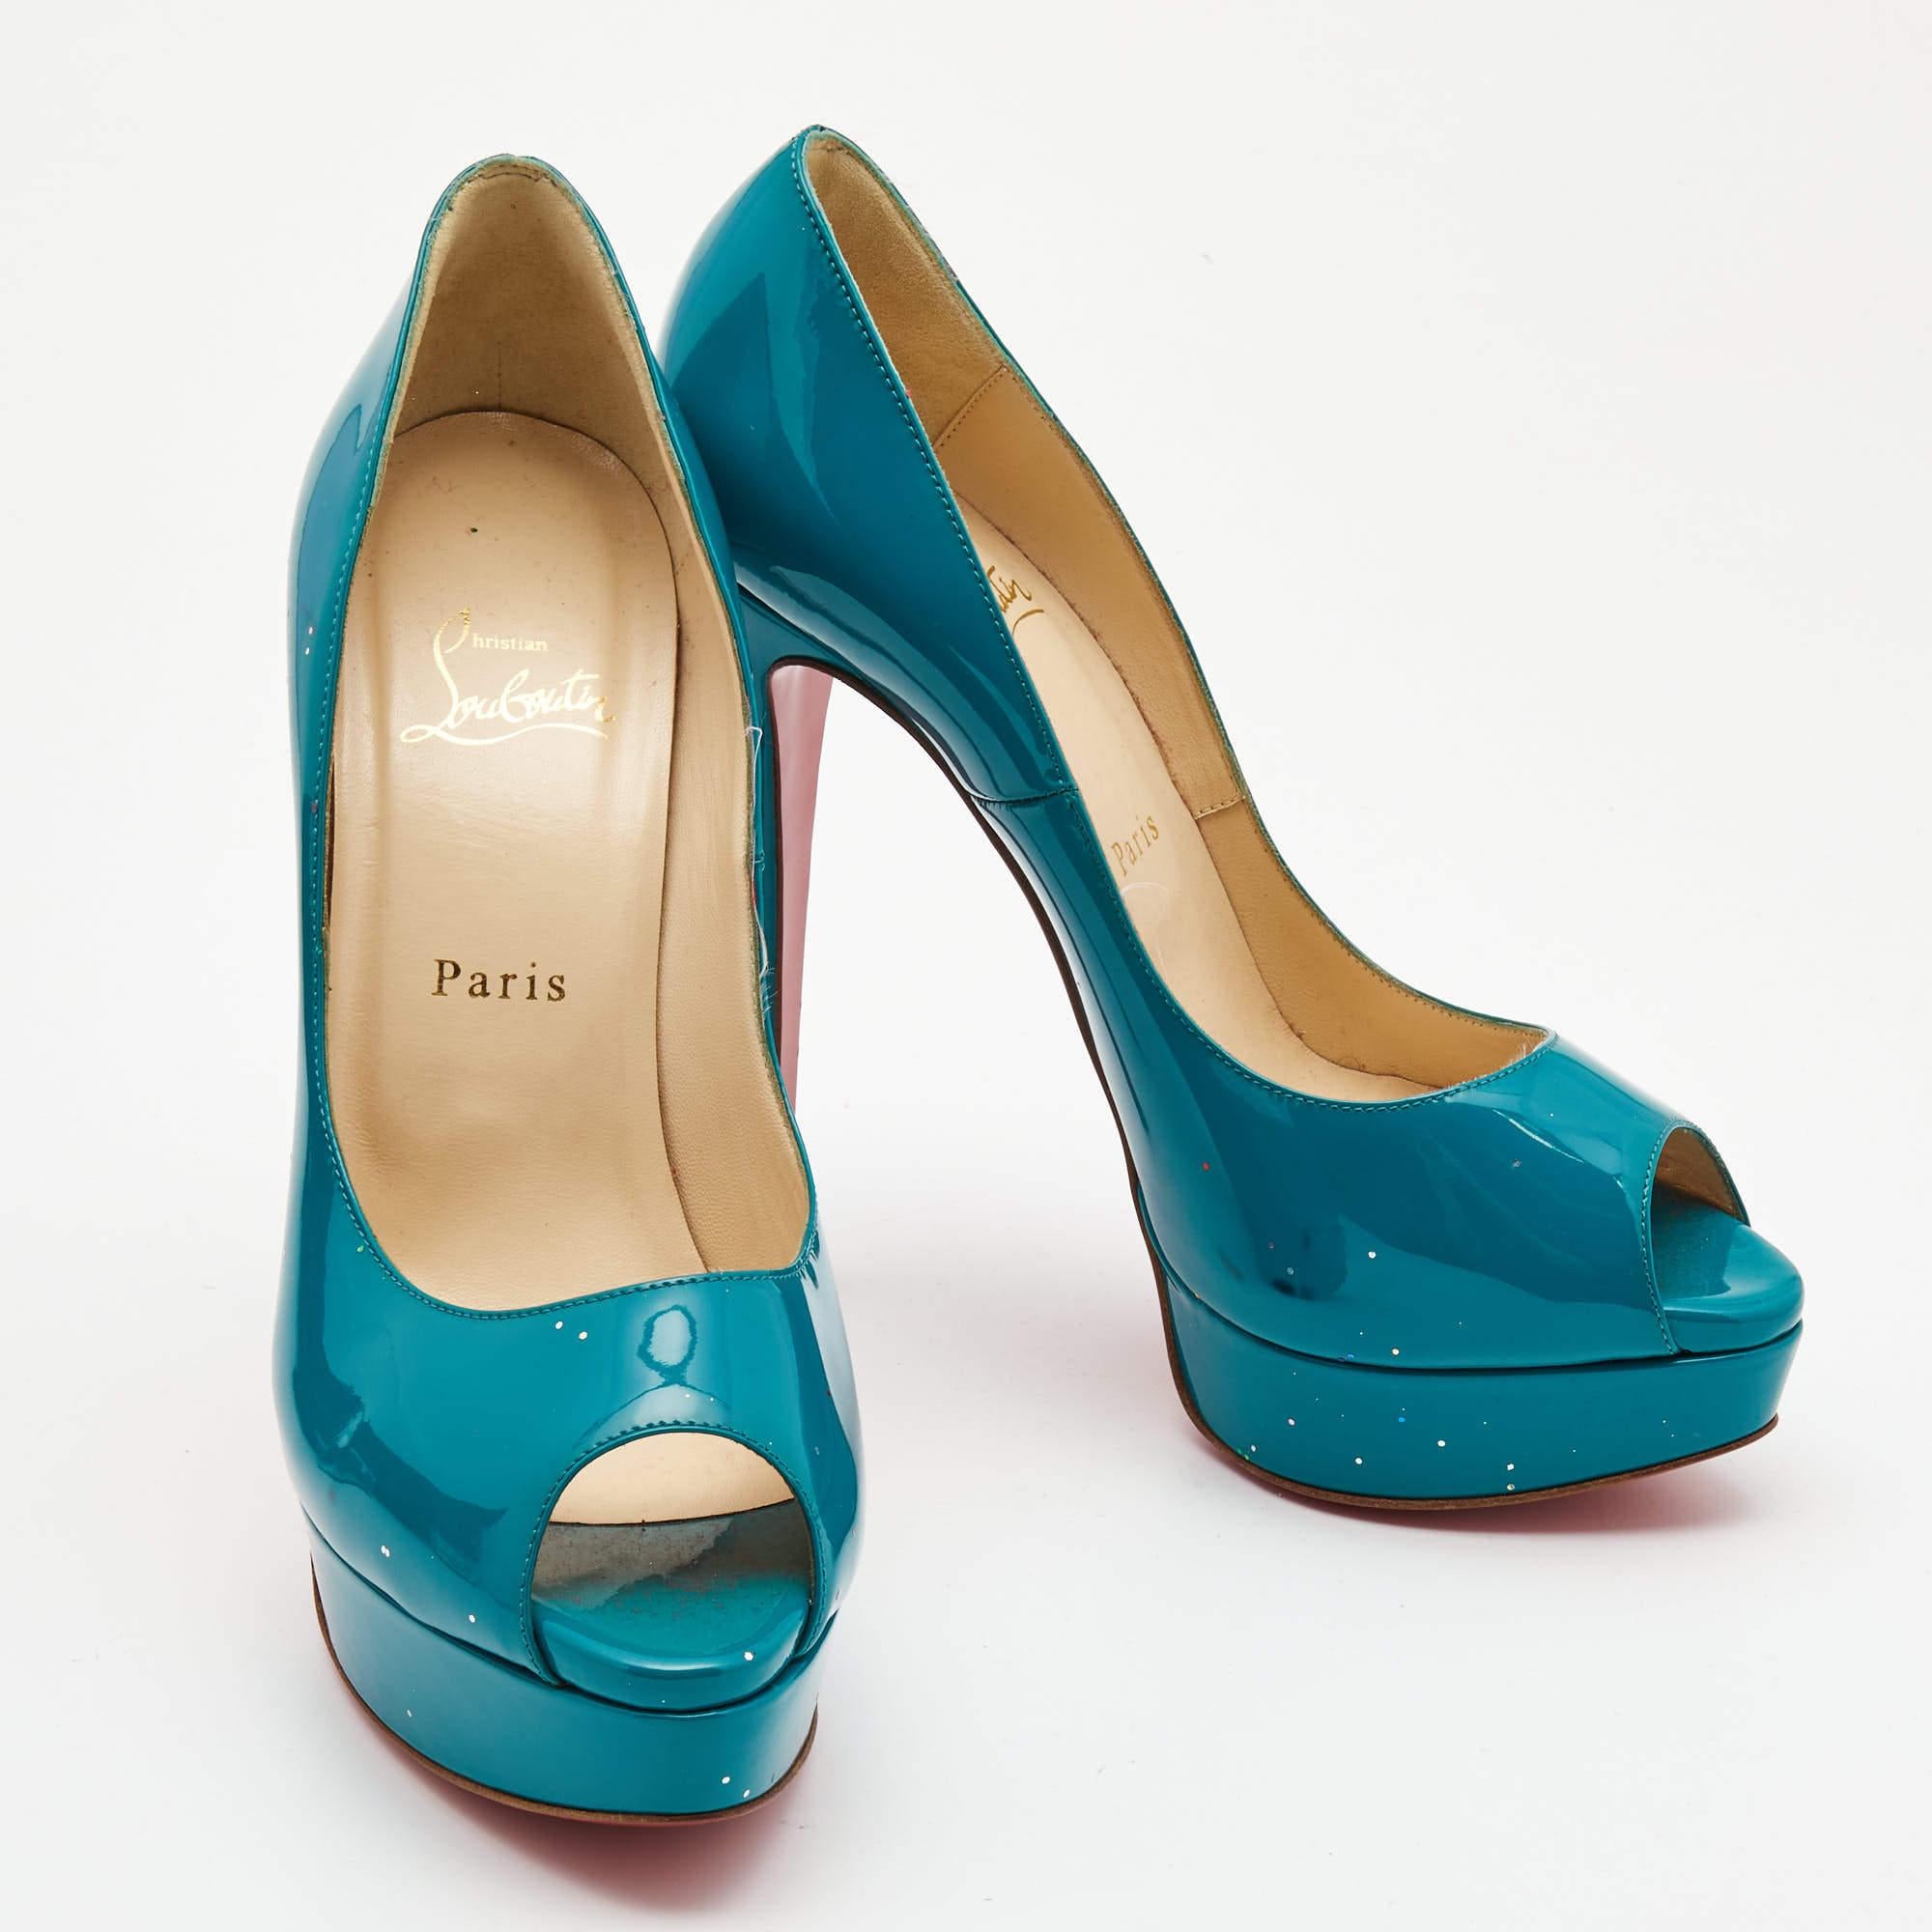 Stand out from the crowd with this classy pair of Louboutins that exude high fashion with class. Crafted from patent leather, this is a creation from their Lady Peep collection. It features a teal green shade with peep toes and a glossy exterior.